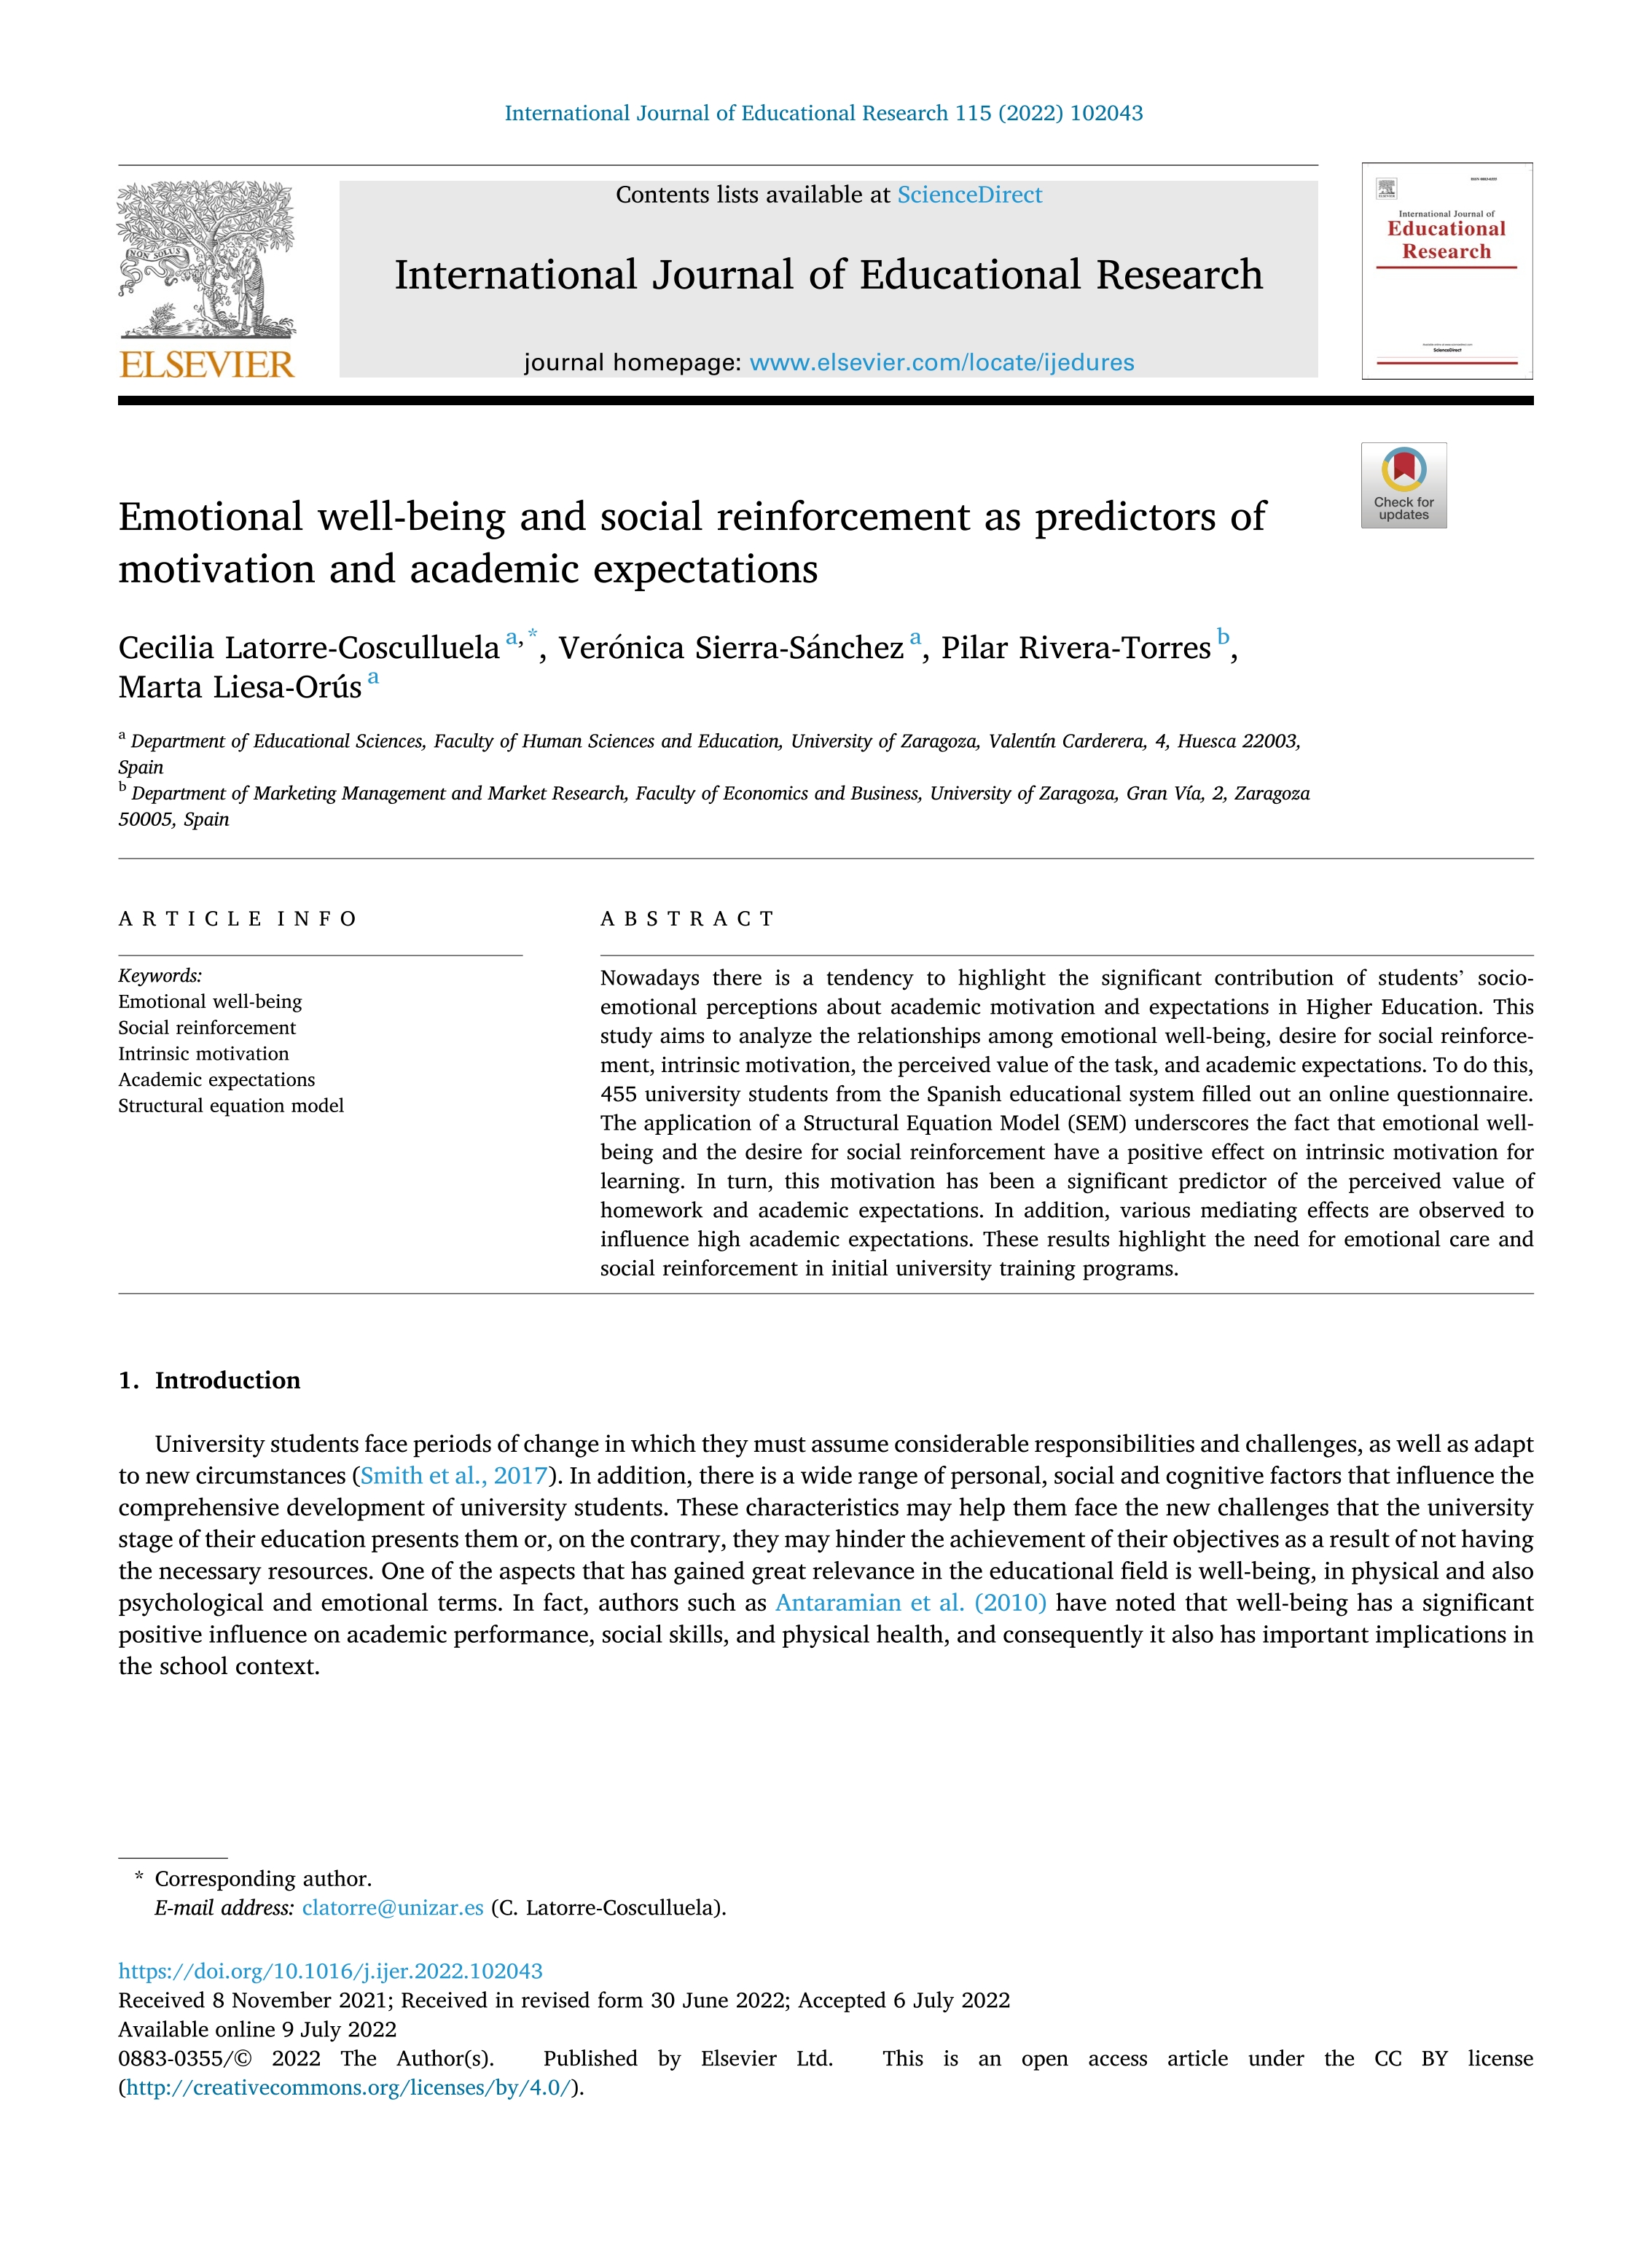 Emotional well-being and social reinforcement as predictors of motivation and academic expectations